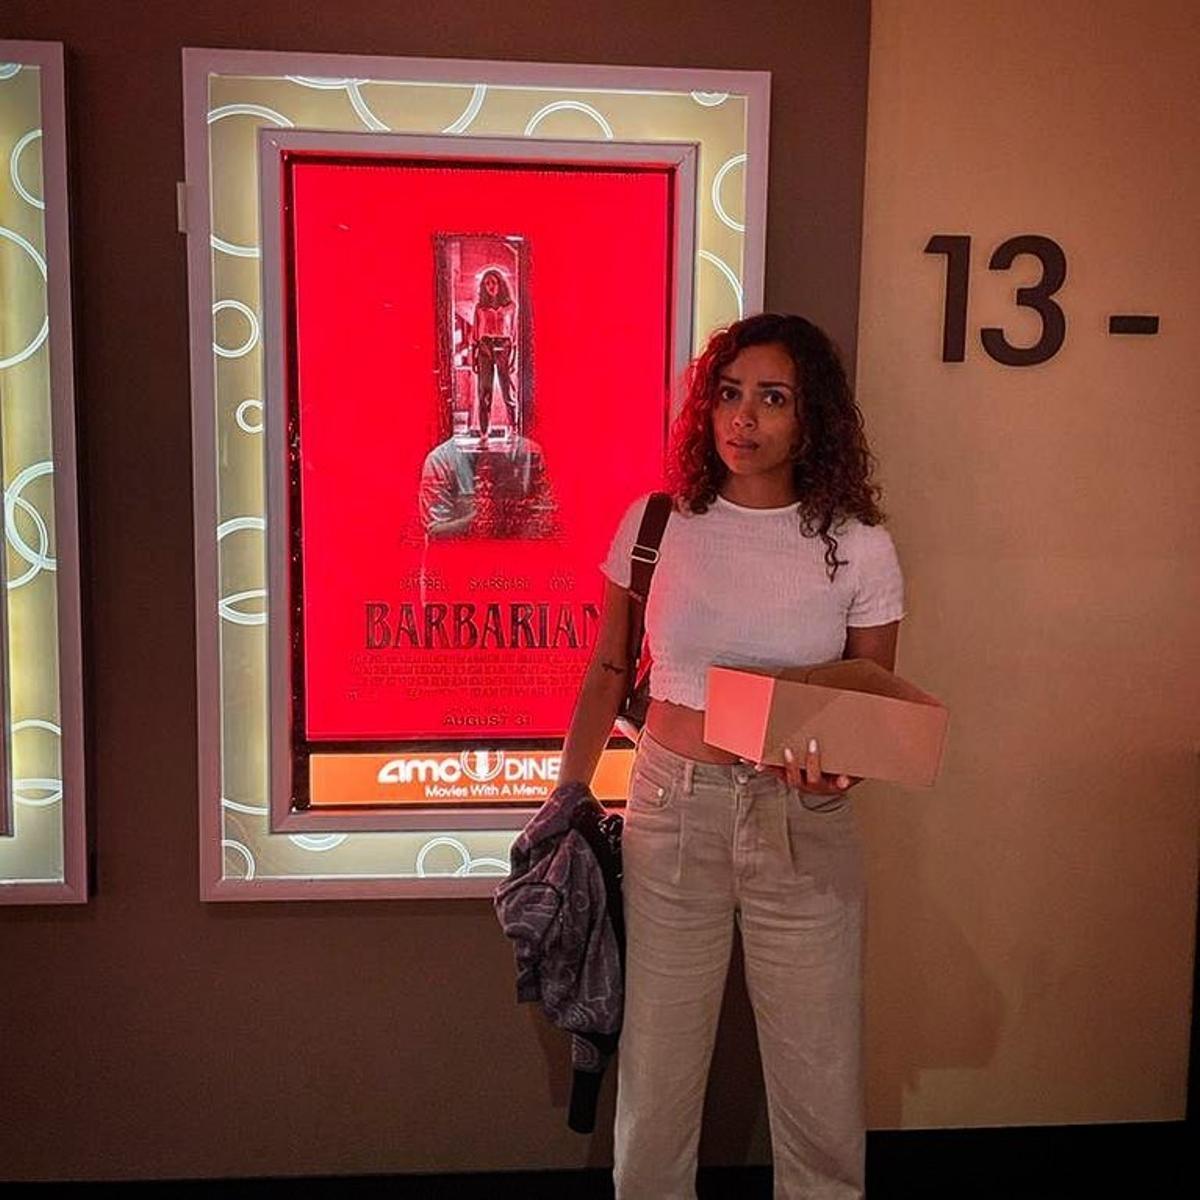 Georgina Campbell: Trying to recreate the barbarian poster while holding a box of hotdogs... Also go see Bodies, Bodies, Bodies!!! It’s fantastic